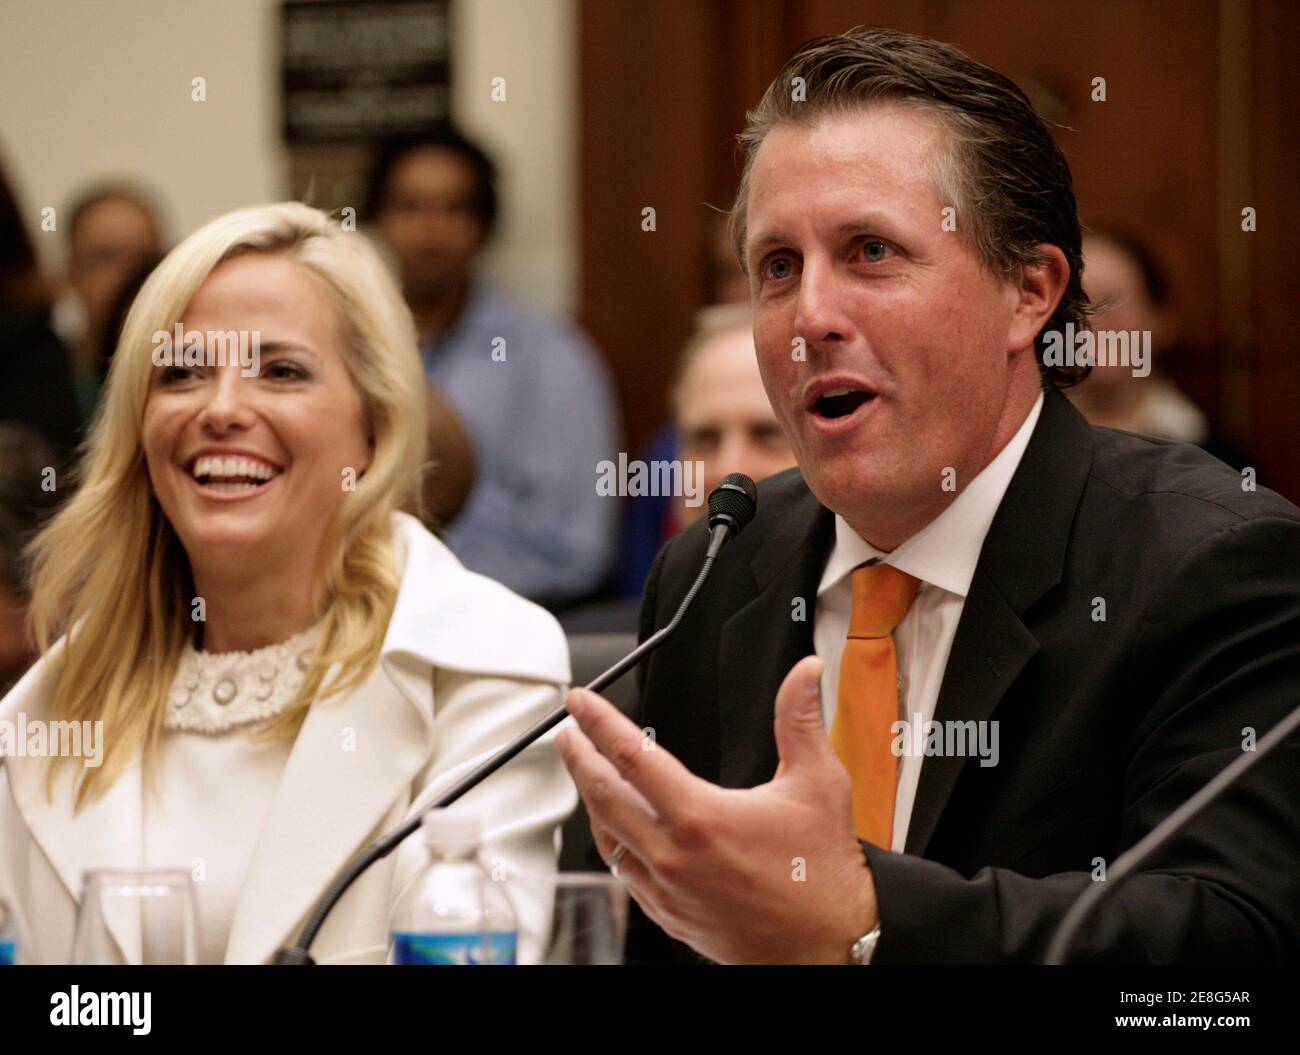 Golfer Phil Mickelson, accompanied by his wife Amy, testifies before the House Education and Labor Committee during a hearing on Innovation in Education through Business and Education STEM Partnerships on Capitol Hill in Washington July 22, 2008. REUTERS/Yuri Gripas (UNITED STATES) Stock Photo